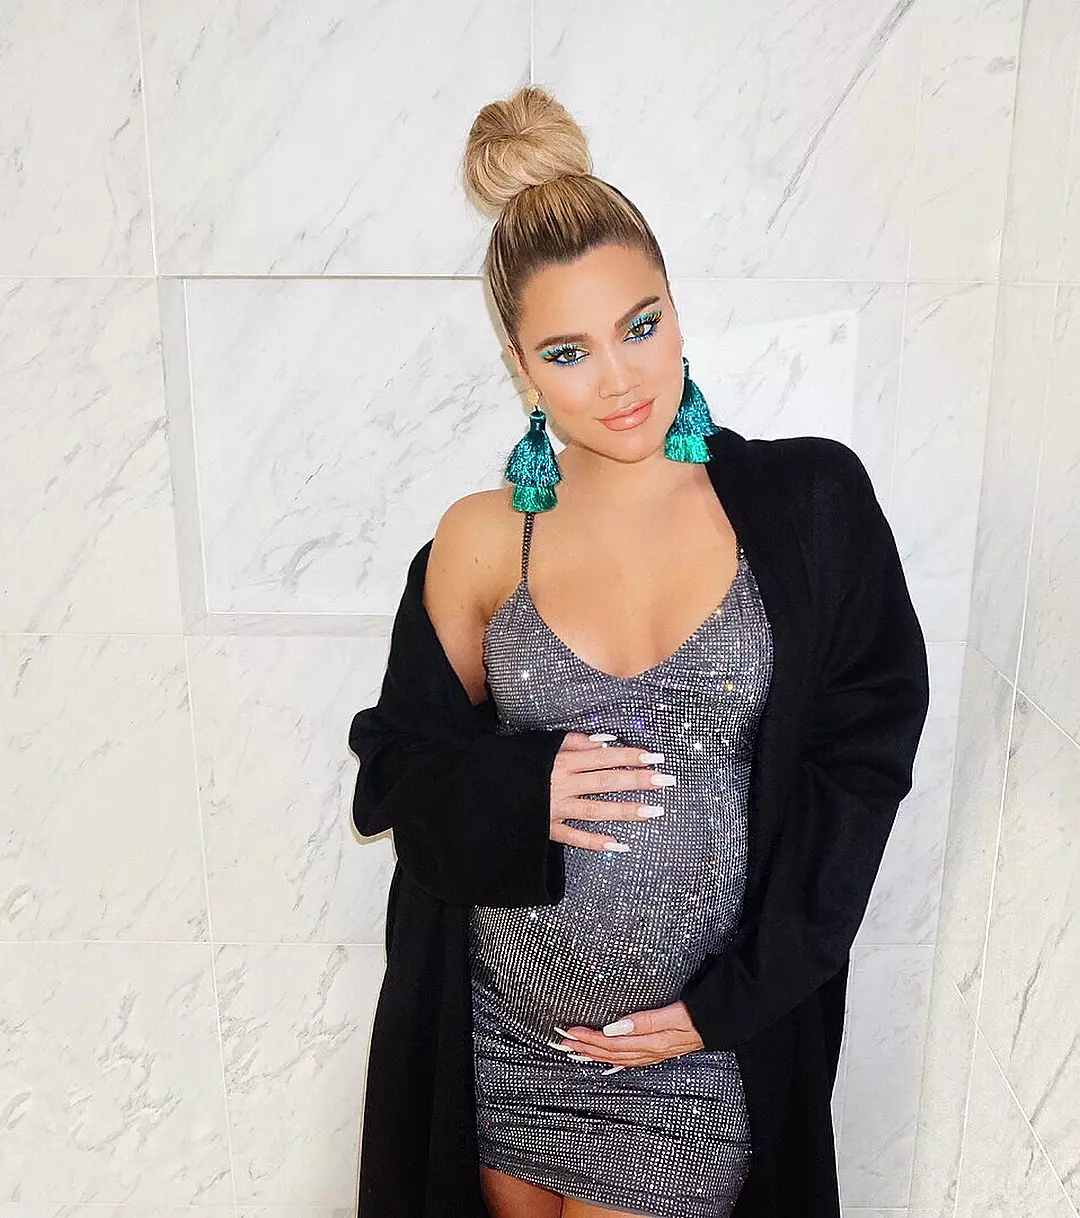 Khloe welcomed baby True two years ago (